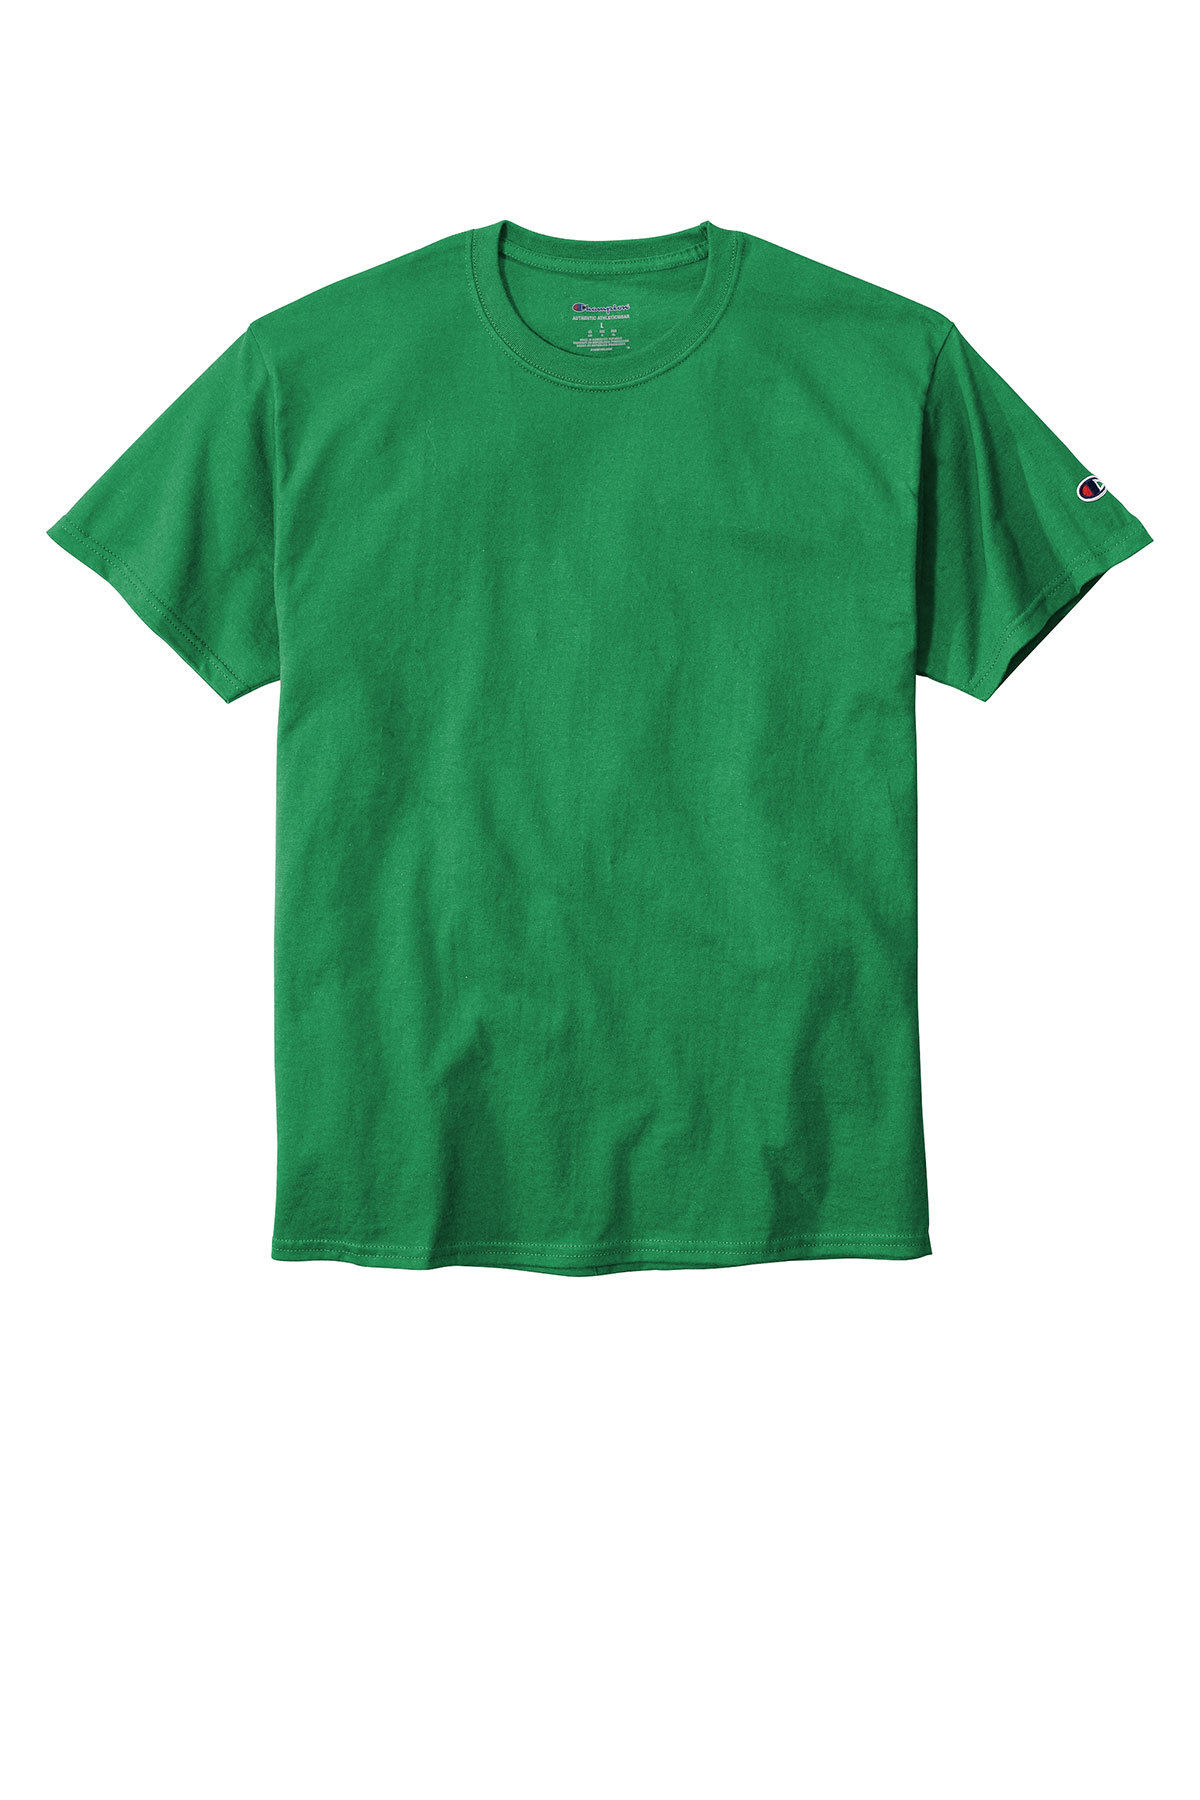 Branded Champion Heritage 6oz. Jersey Tee Kelly Green